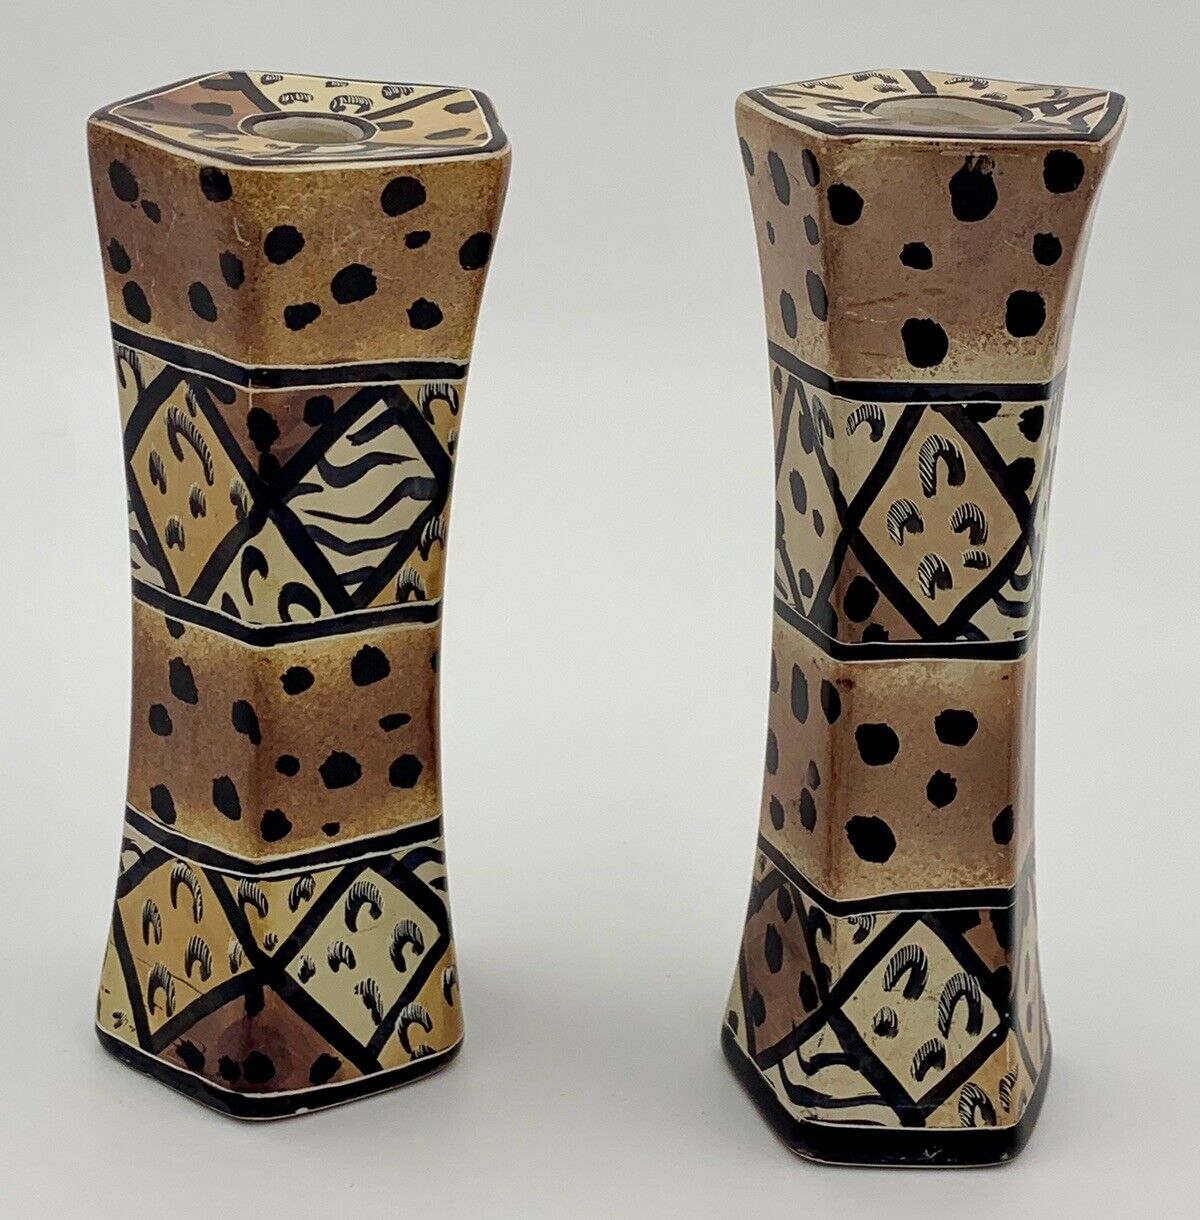 Vintage Hancrafted Soapstone Animal Print Candlestick Holders Made in Kenya S/2